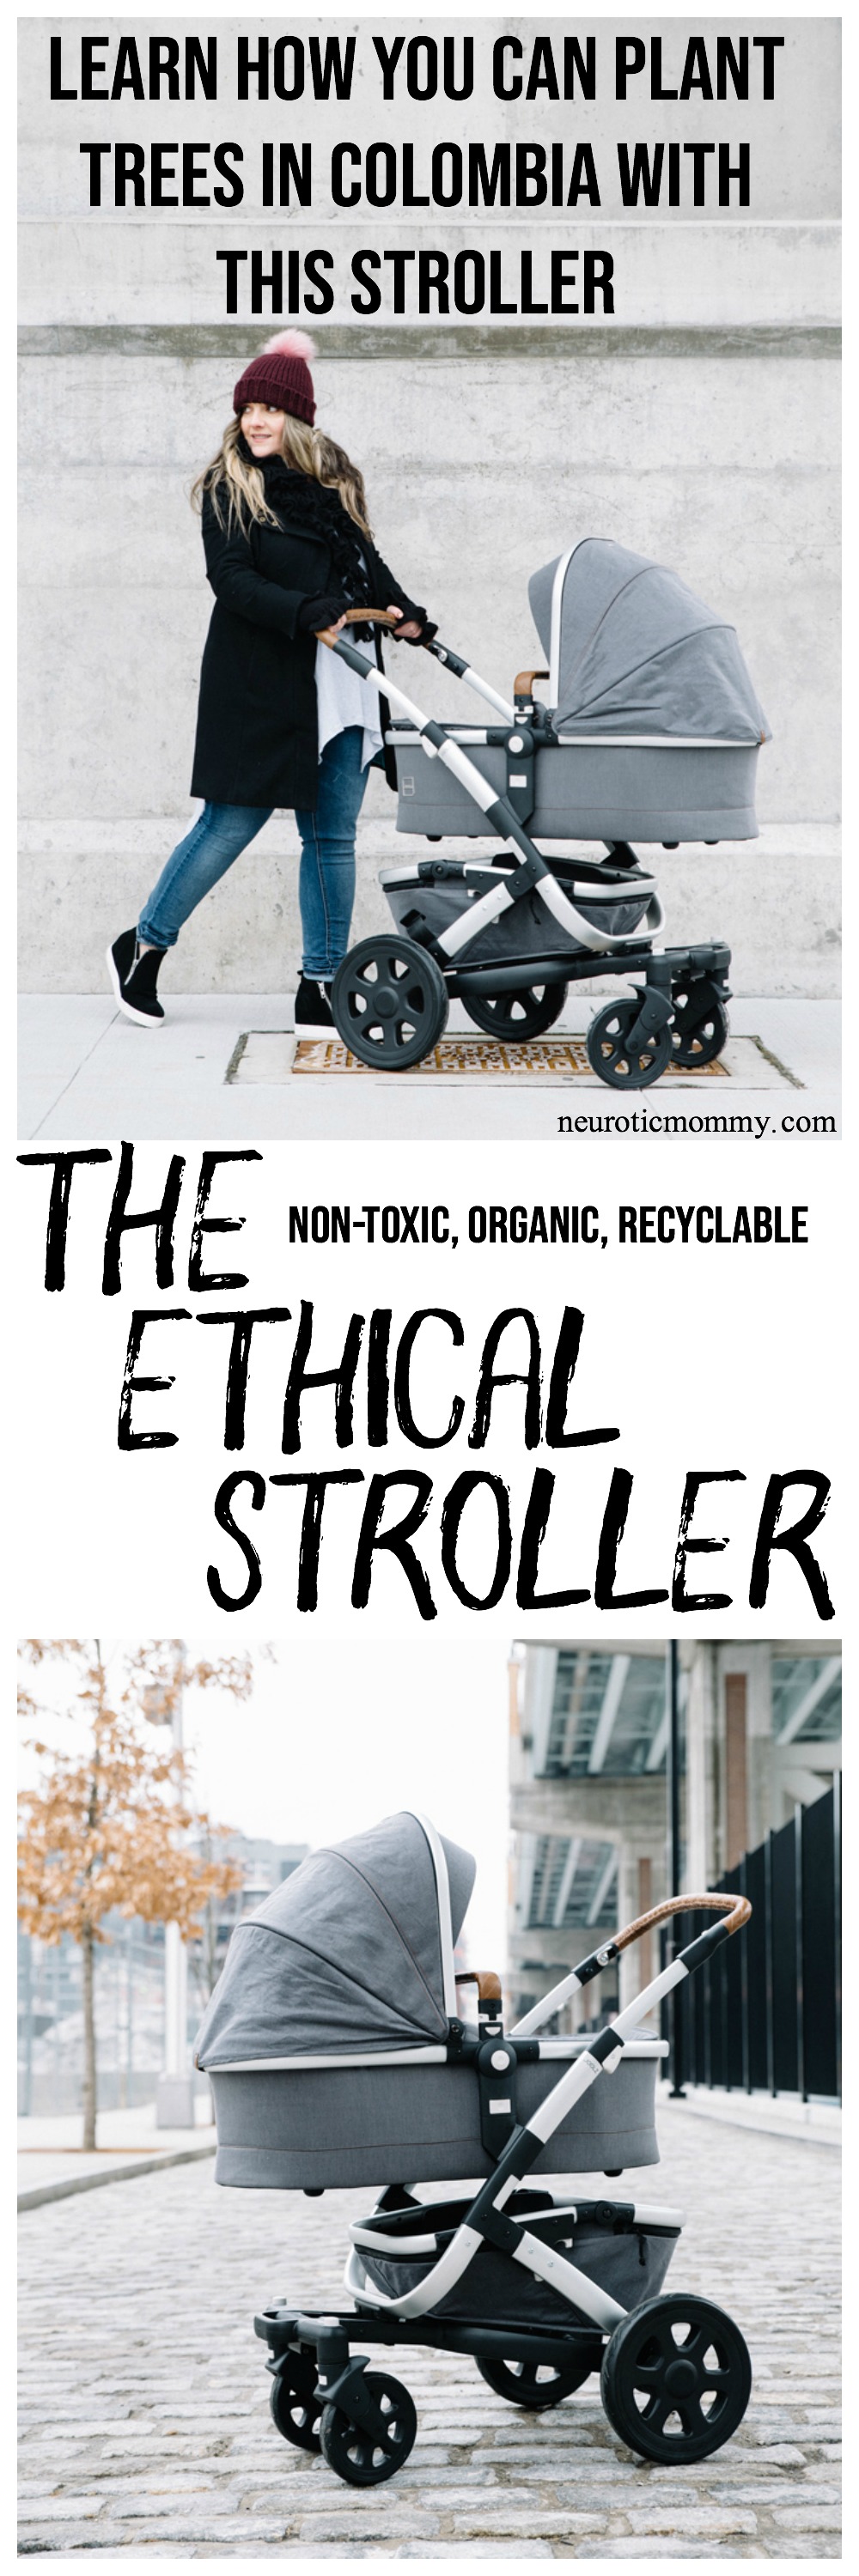 The Ethical Stroller (Non-Toxic, Organic, Recyclable) Introducing you to the Joolz Geo², Vegan, Sustainable, Ethical, Eco-Friendly, packaged with reusable and recycled material, non toxic and organic. NeuroticMommy.com